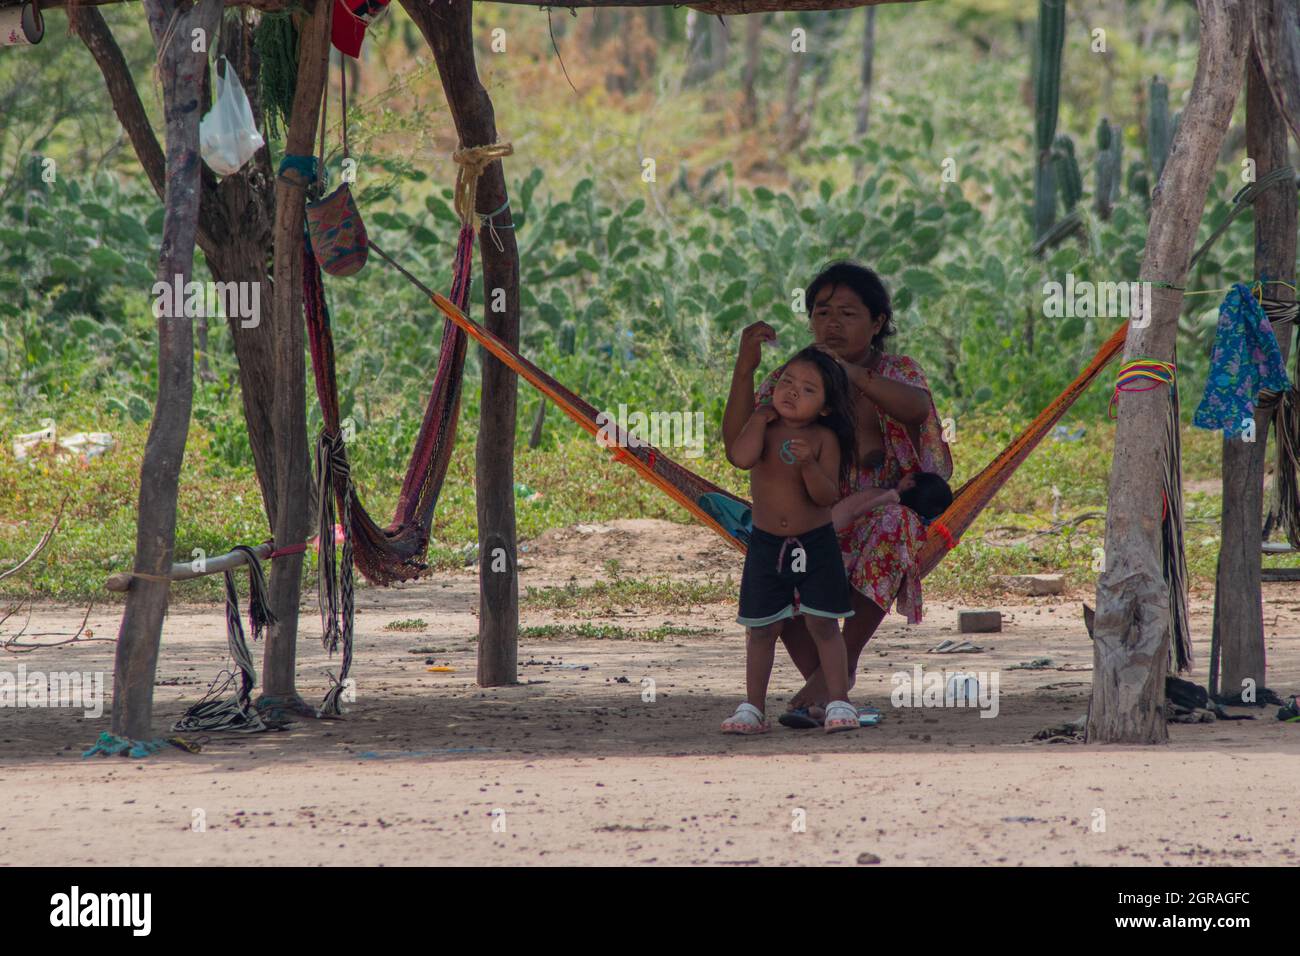 Mayapo, Colombia. 26th Sep, 2021. A mother hairdresses her daughter during a Humanitarian Mission developed by 'De Corazon Guajira' in Mayapo at La Guajira - Colombia were they visited the Wayuu indigenous communities 'Pactalia, Poromana, Perrohuila' on September 26, 2021. The Guajira region in Colombia is the poorest region in Colombia, with its people commongly living without drinkable water, electricity and food. Credit: Long Visual Press/Alamy Live News Stock Photo